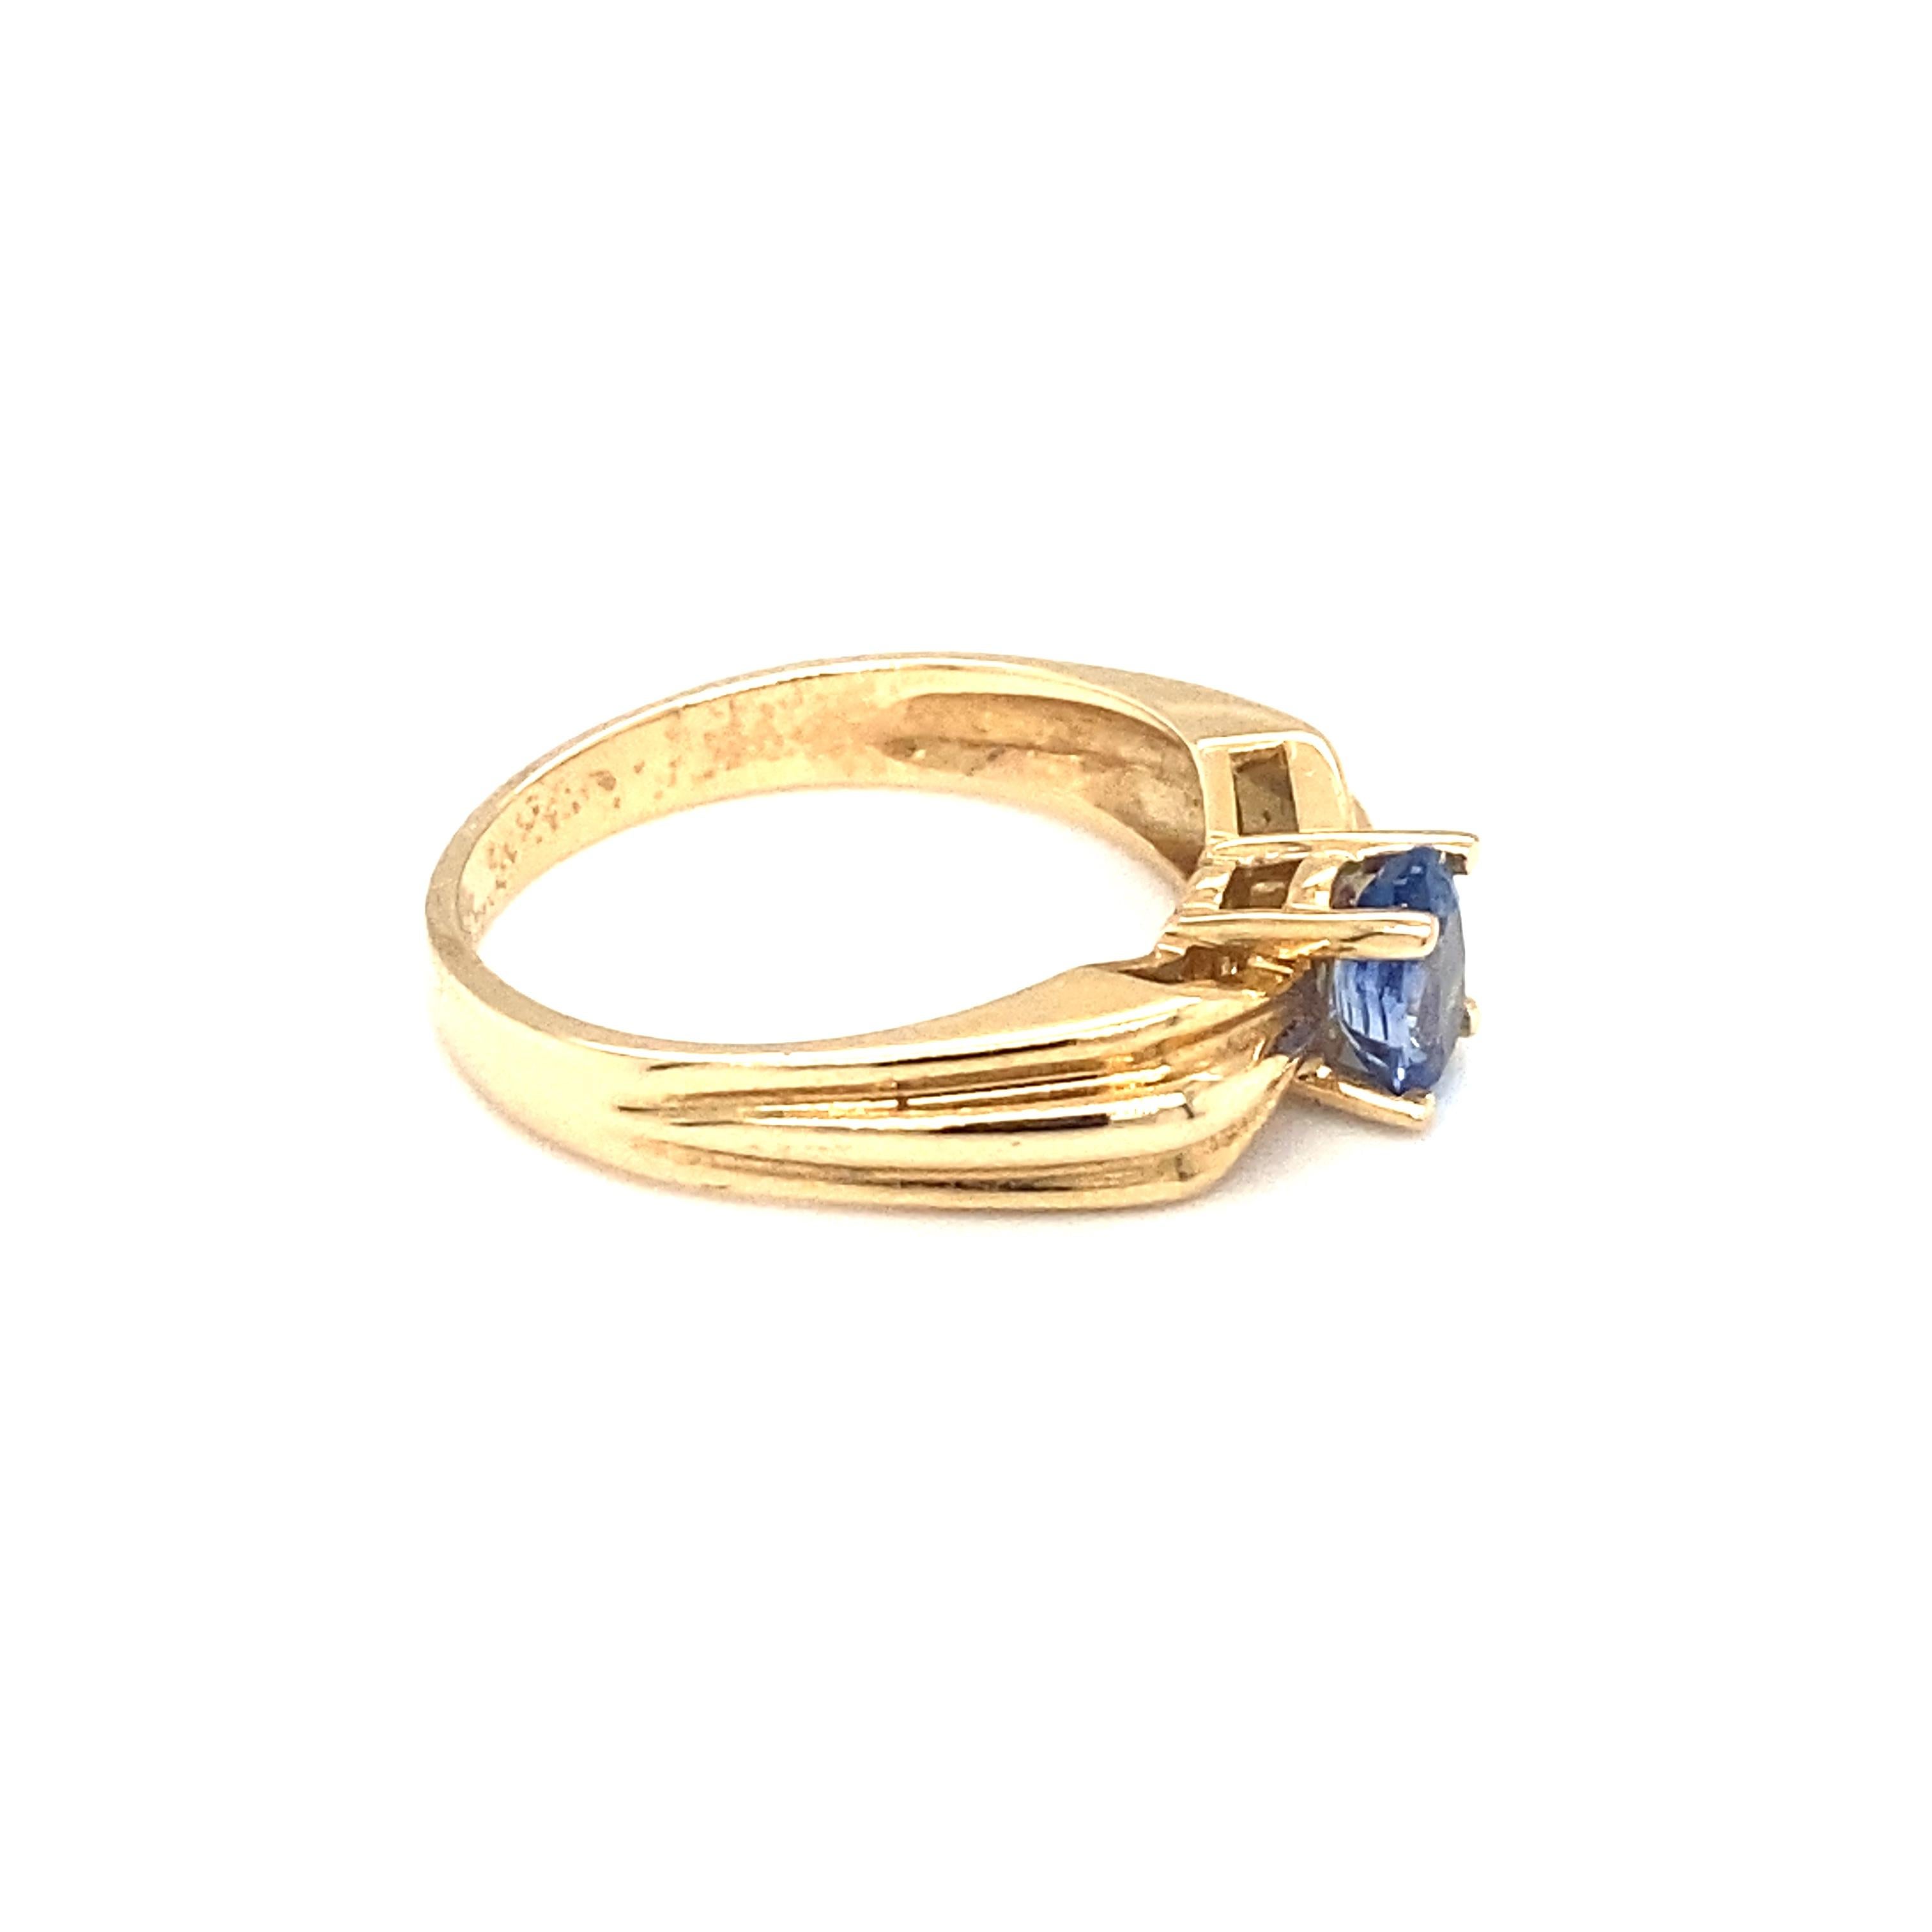 Item Details: This ring features an oval tanzanite and a ribbon design for the band and features French hallmarks.

Circa: 1990s
Metal Type: 14 Karat Yellow Gold
Weight: 3.5 grams
Size: US 7.25, resizable

Tanzanite Details:

Carat: 0.75